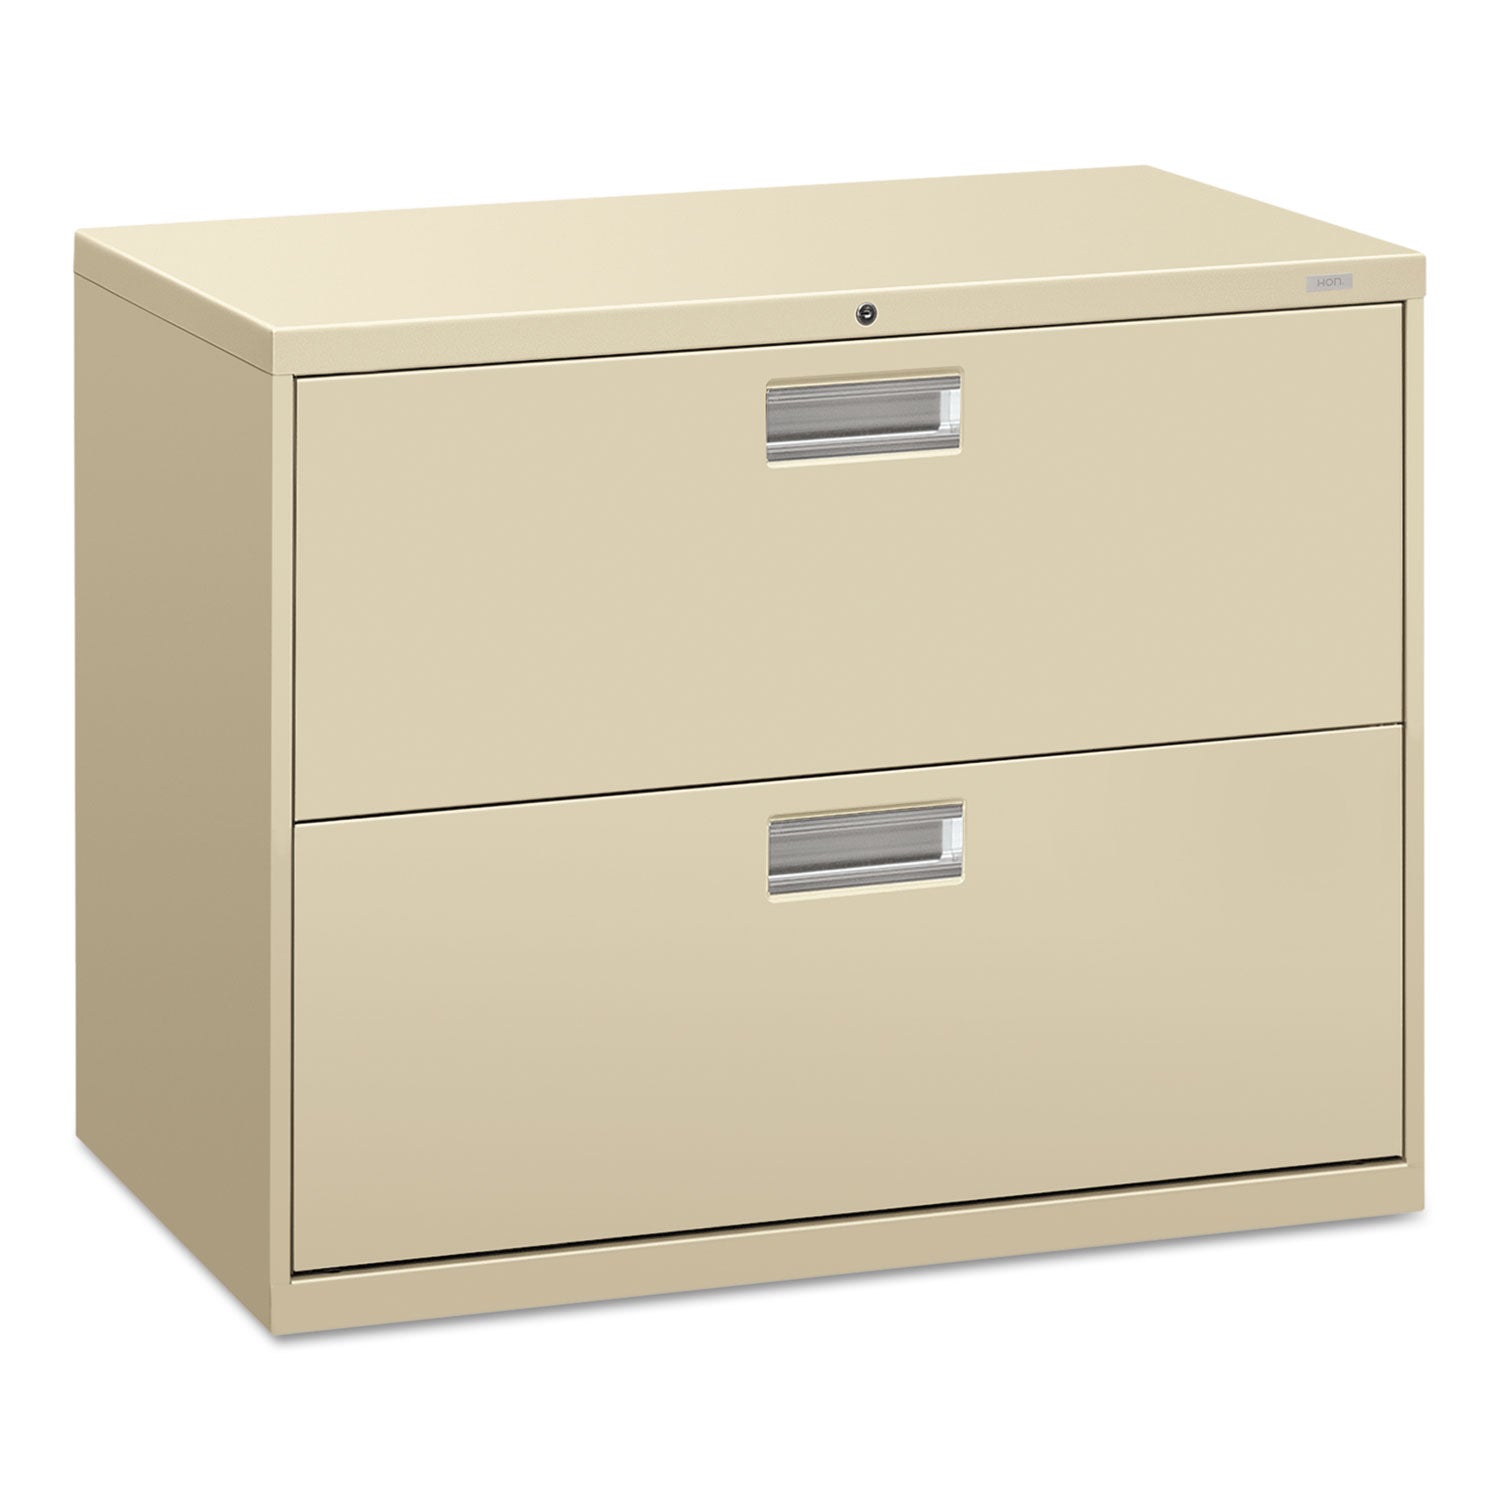 Brigade 600 Series Lateral File, 2 Legal/Letter-Size File Drawers, Putty, 36" x 18" x 28 - 